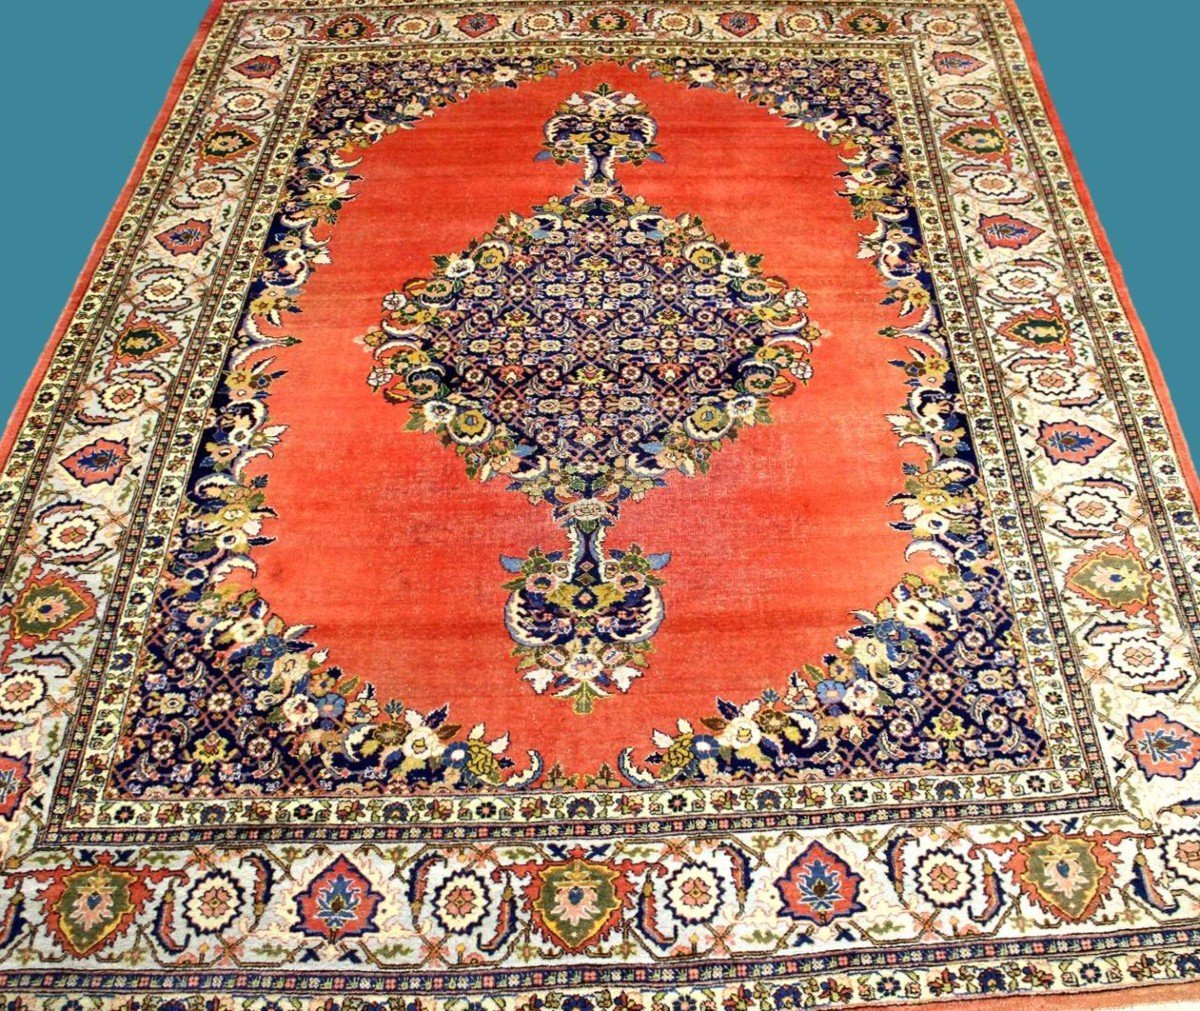 Old Tabriz Rug, 275 Cm X 368 Cm, Hand-knotted Wool Around 1950 In Iran, Very Good Condition-photo-8